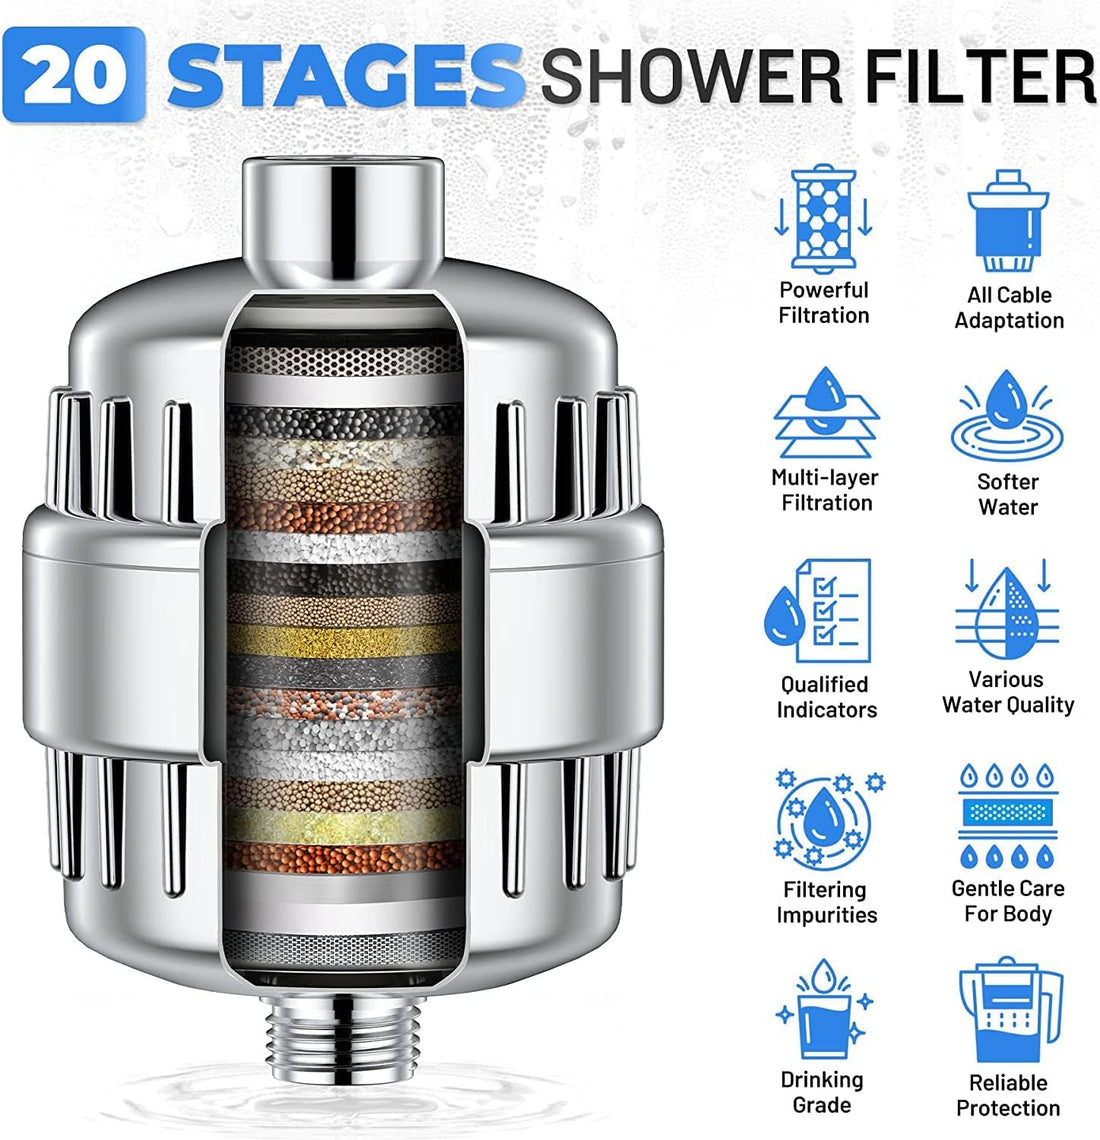 20 Stage Showerhead Filter for Hard Water, Removes Chlorine, Fluoride, Polished Chrome